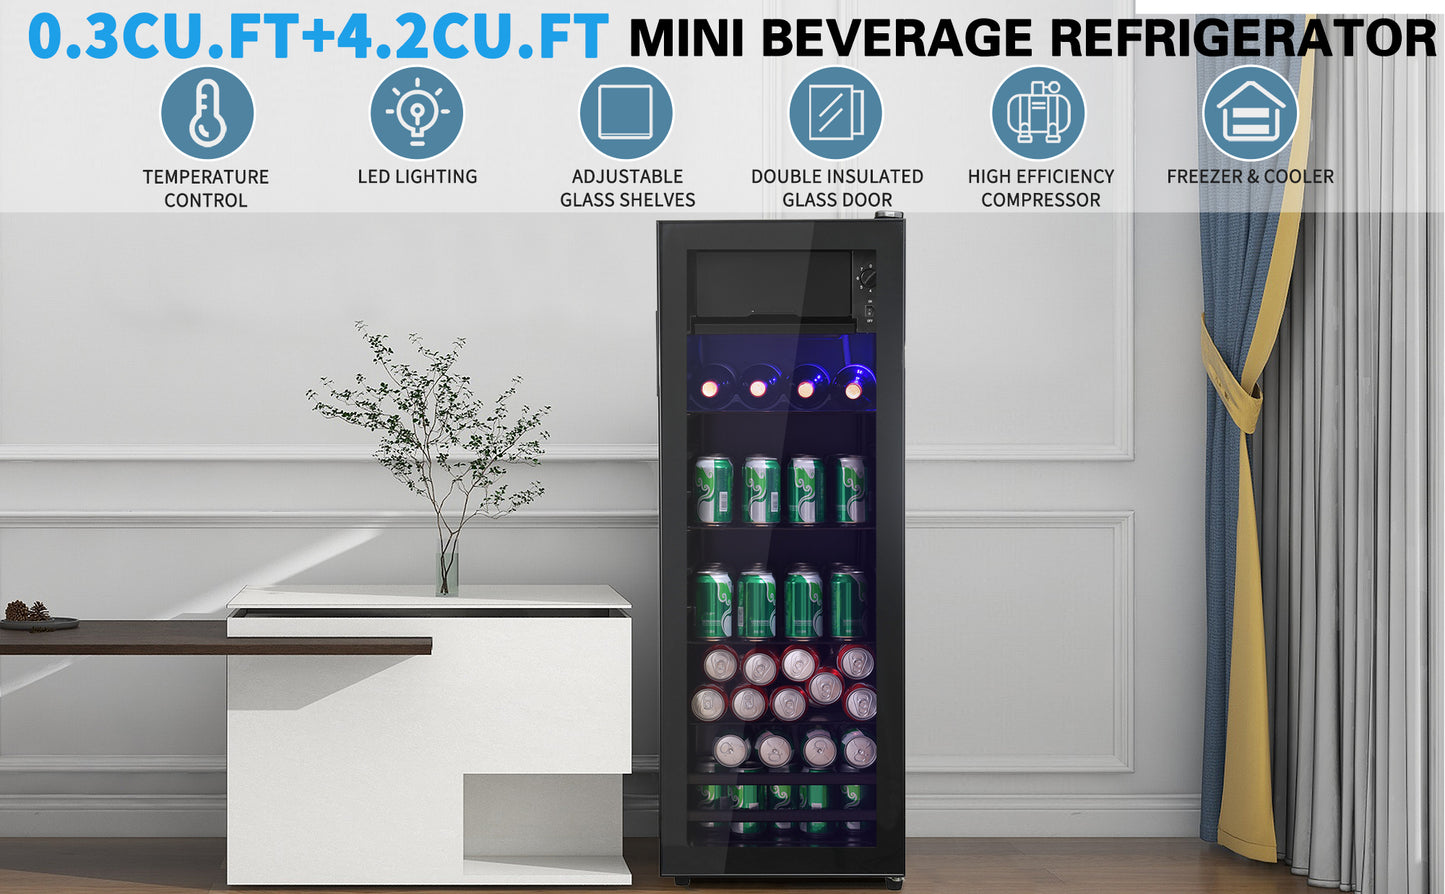 4.5Cu.ft mini fridge, 0.3Cu.ft freezer, up to 94 cans of soda, beer or wine. Silent, high-efficiency and energy-saving compressor, LED lighting, 16.10"×15.70"×43.10", home, RV, apartment, office, etc.